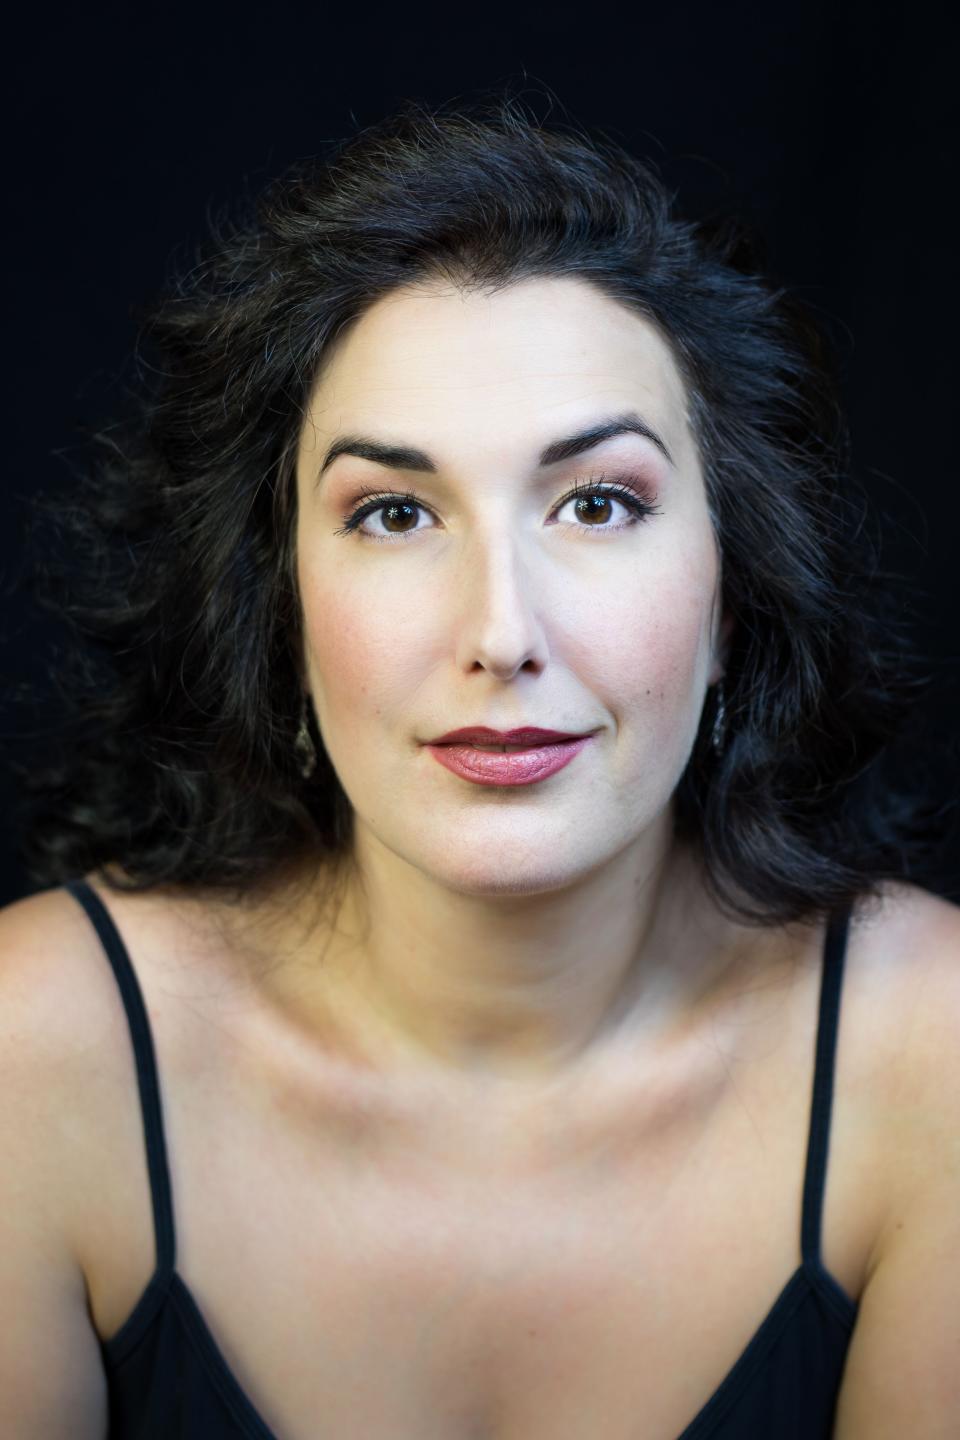 Mezzo soprano Lisa Chavez returns to Sarasota Opera for two productions in the upcoming season, including the title role in the rarely performed “Thérèse” by Jules Massenet.